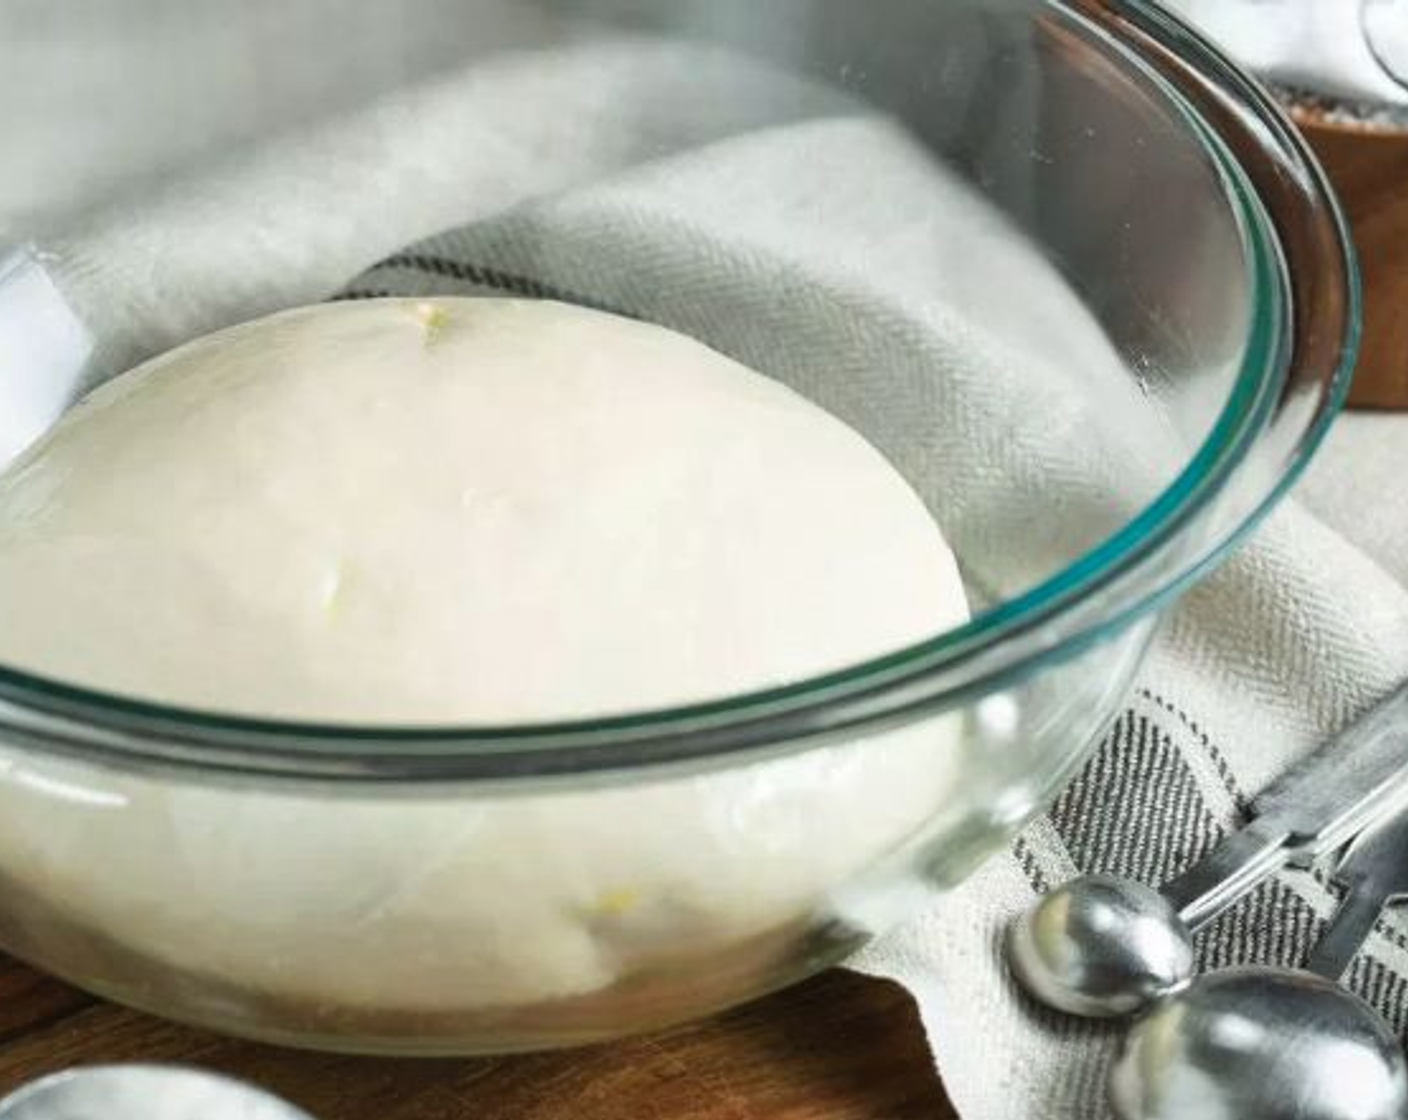 step 6 Place dough in a large bowl lightly coated with Neutral Oil (1 tsp). Cover with plastic wrap or clean kitchen towel and allow to rise in a warm, draft-free area for 1 hour, until doubled in size.